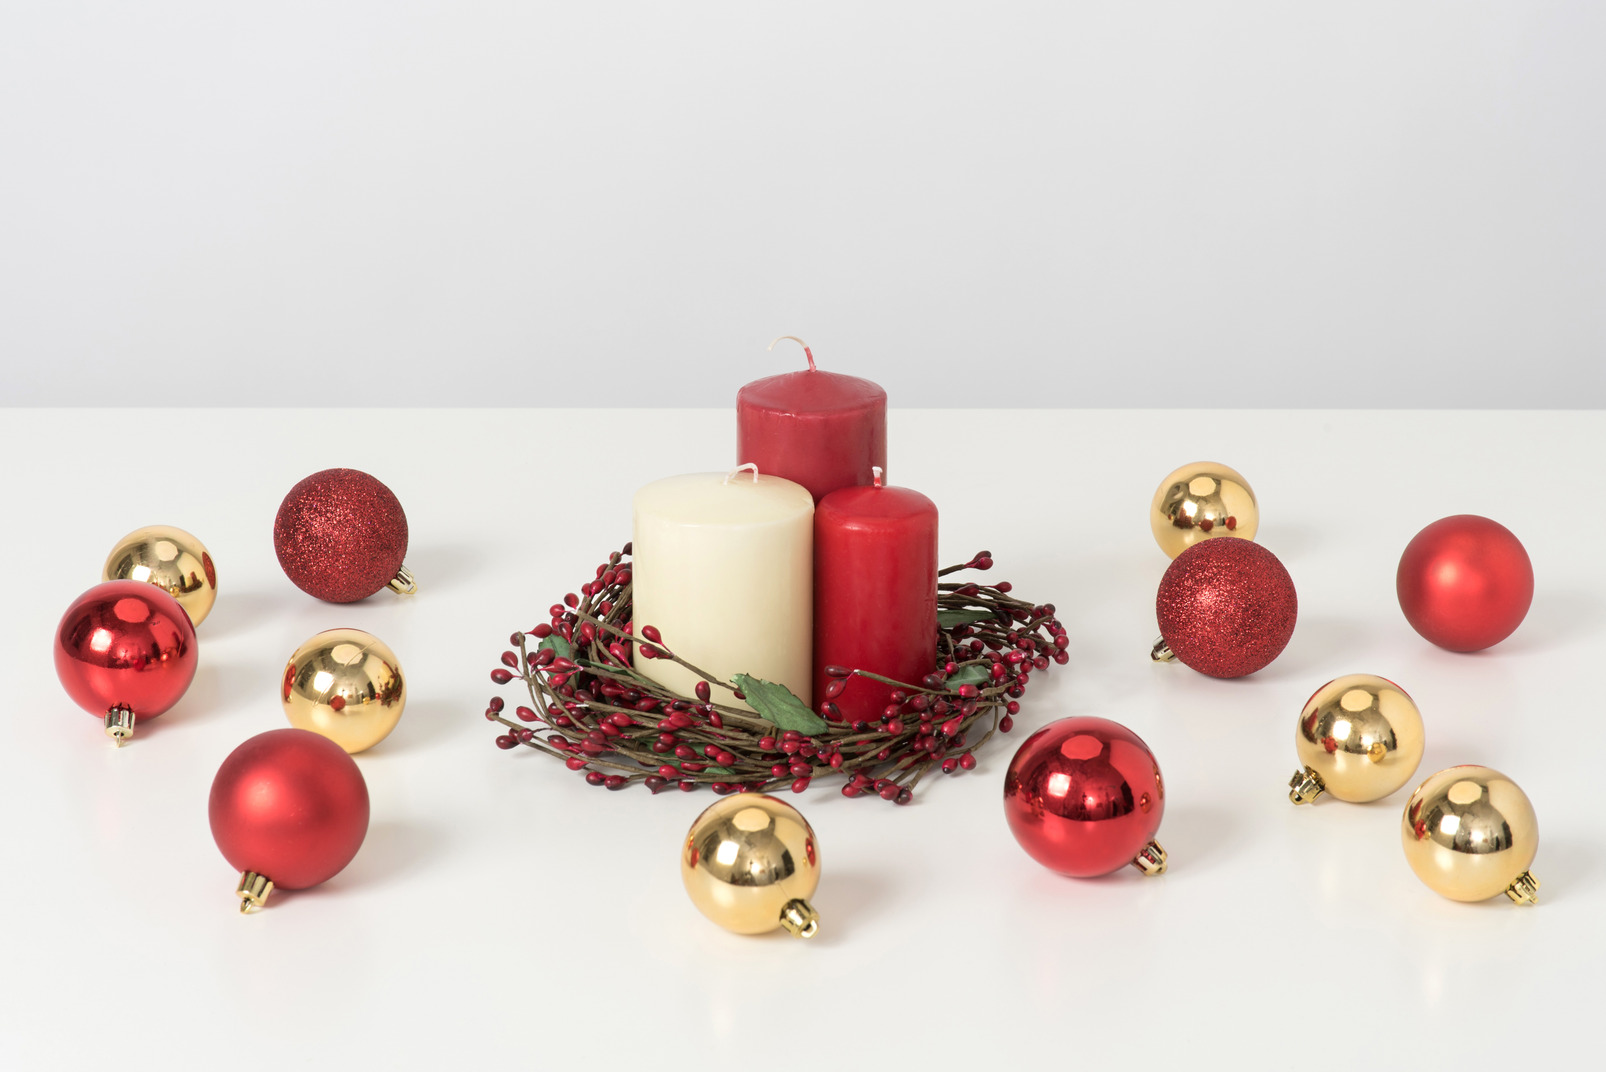 Three candles in minimalistic christmas wreath and decorations near it